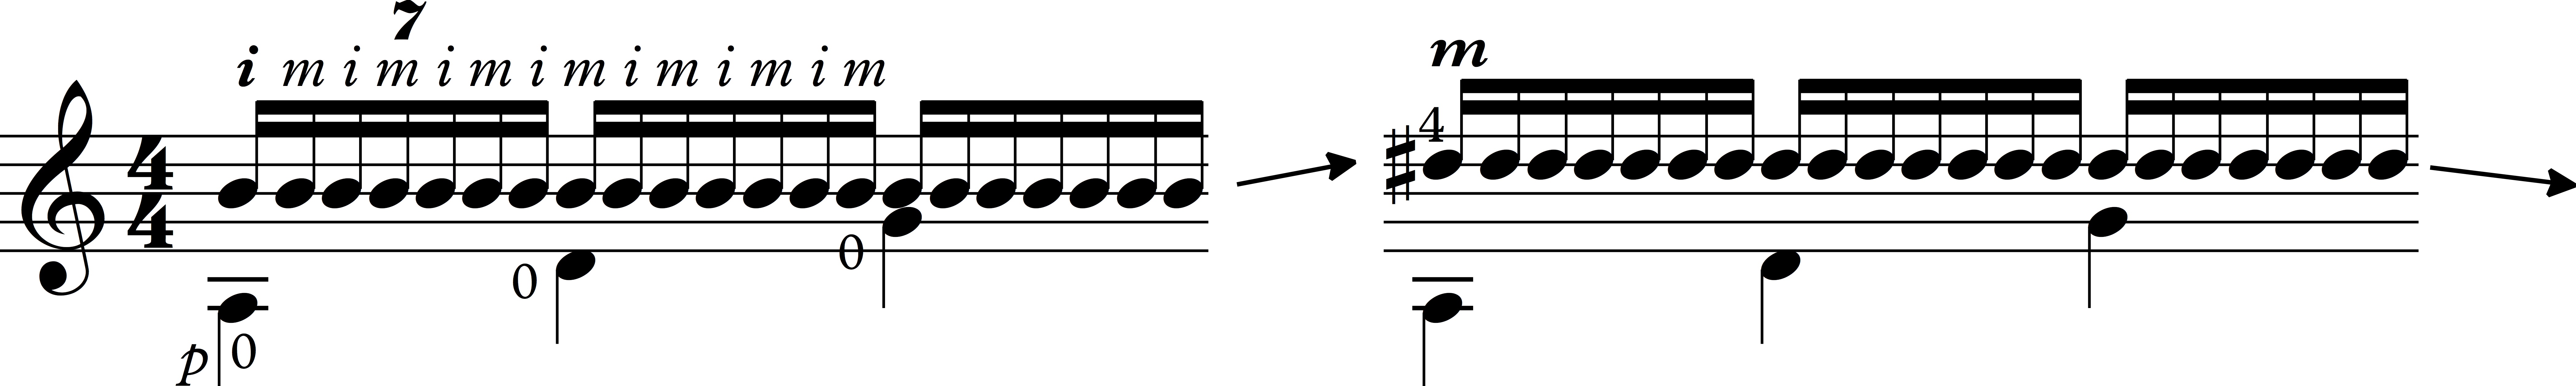 Right Hand Warm Up Sequence 11.jpg